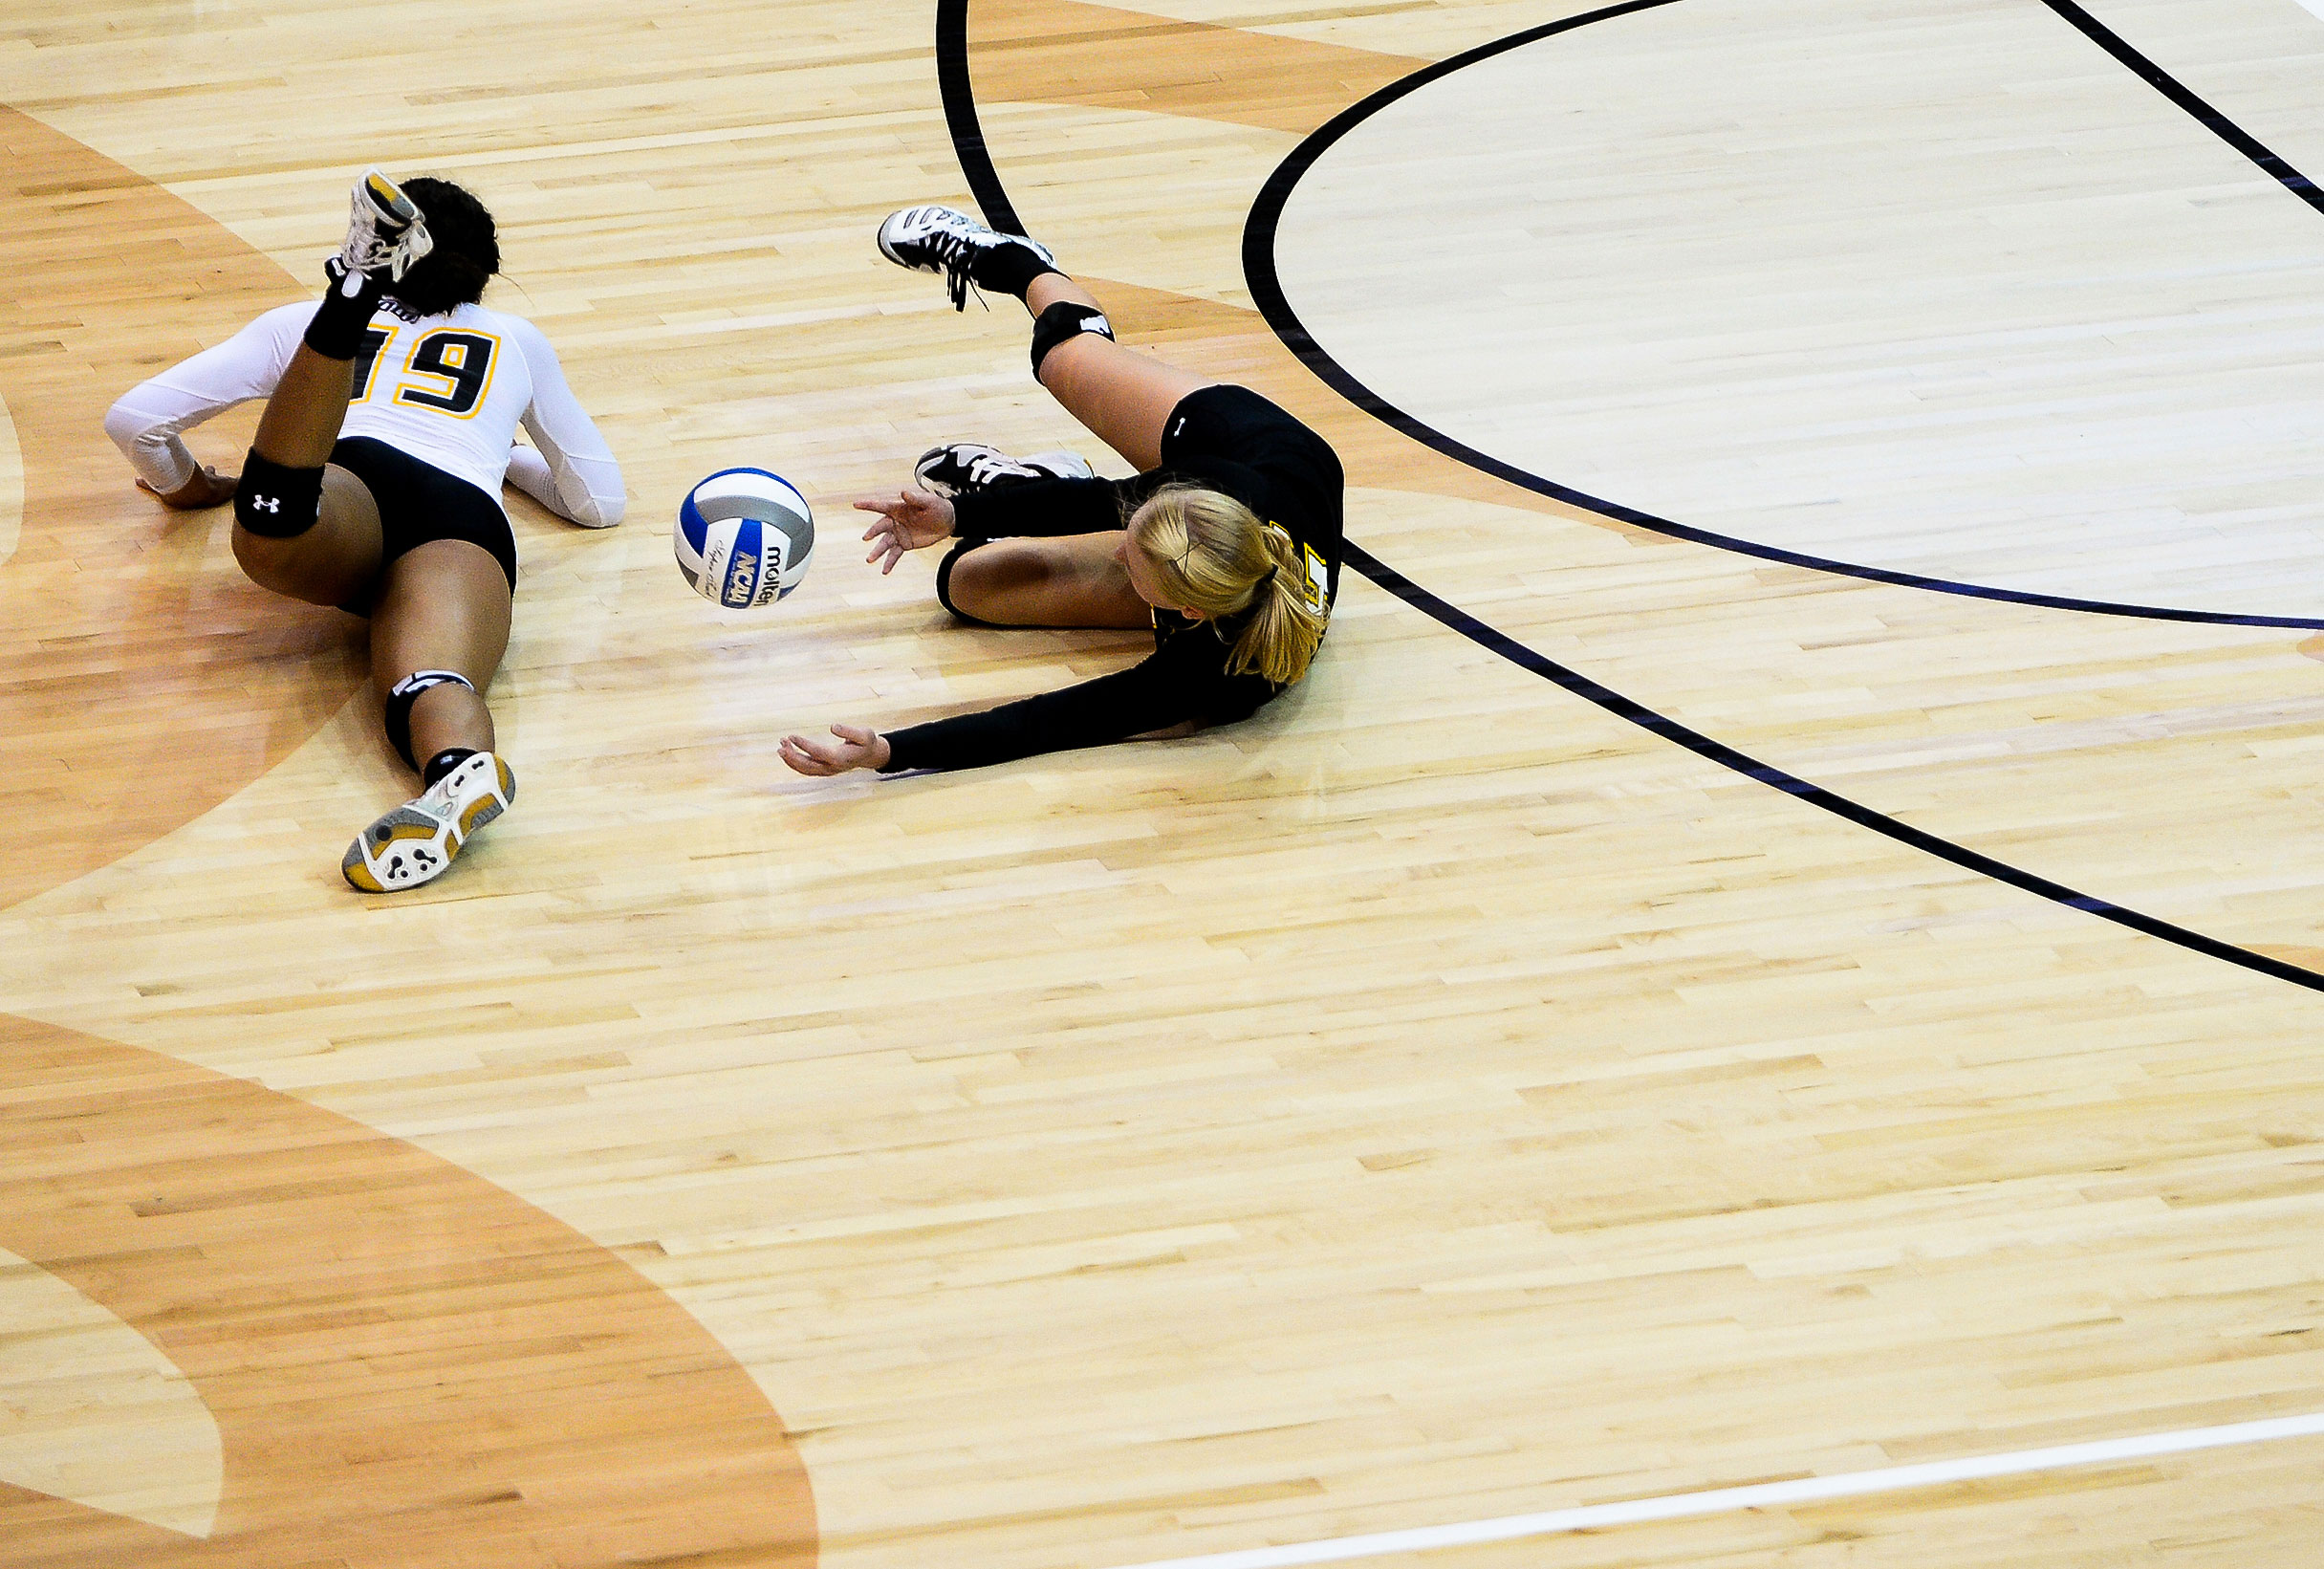  Towson University volleyball players attempt to dive for a ball during 
their home opener against Coppin State University in Baltimore, MD on Sept. 3, 2013.  